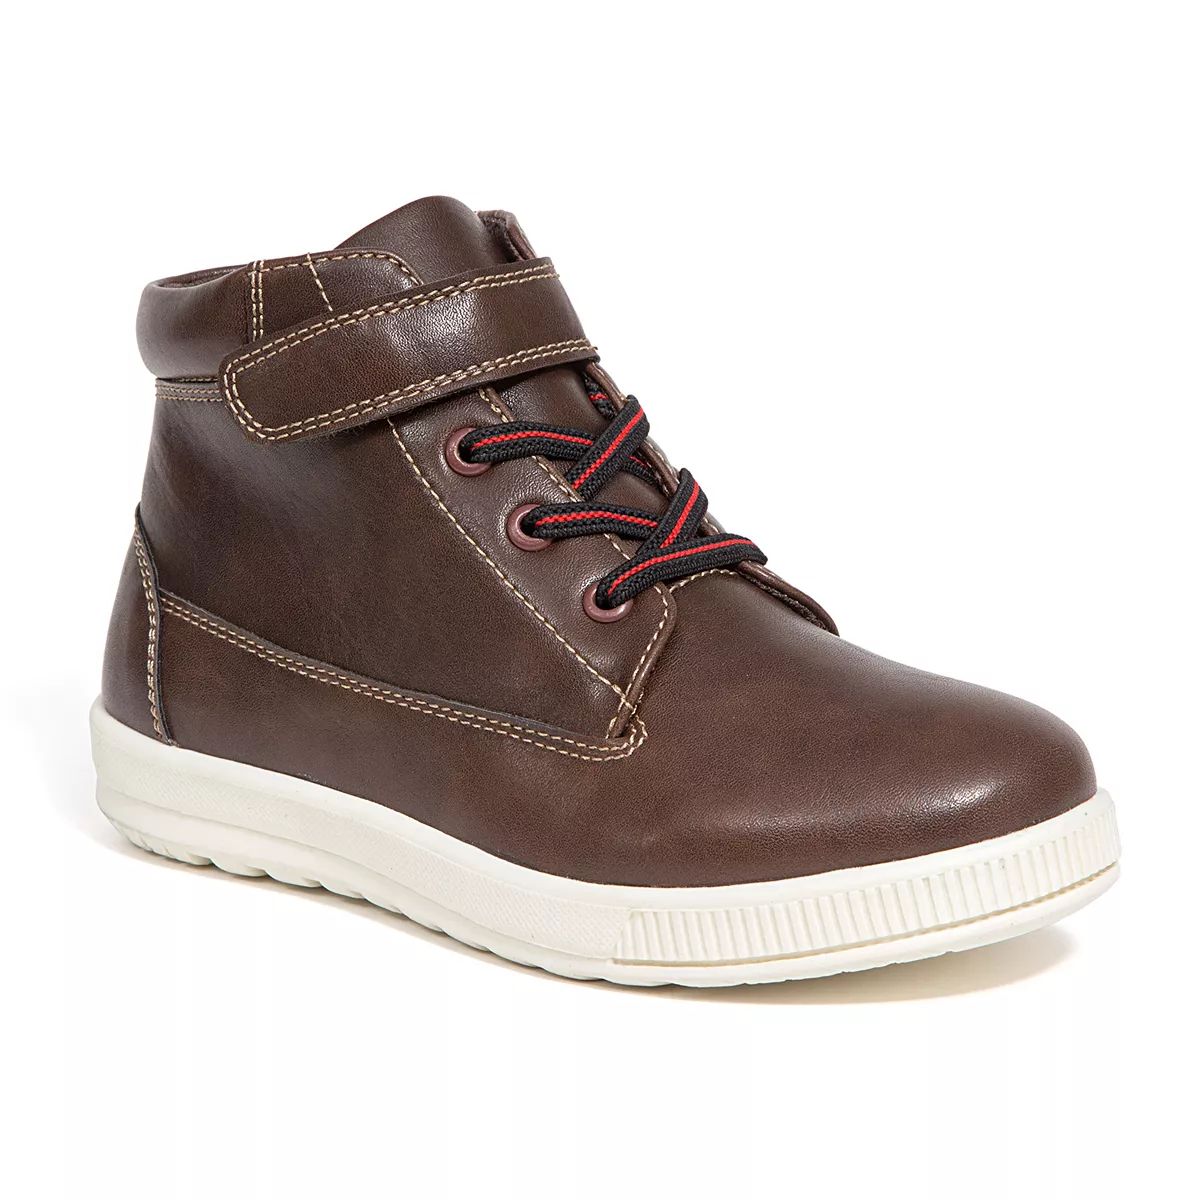 Deer Stags Niles Boys' Ankle Boots | Kohl's